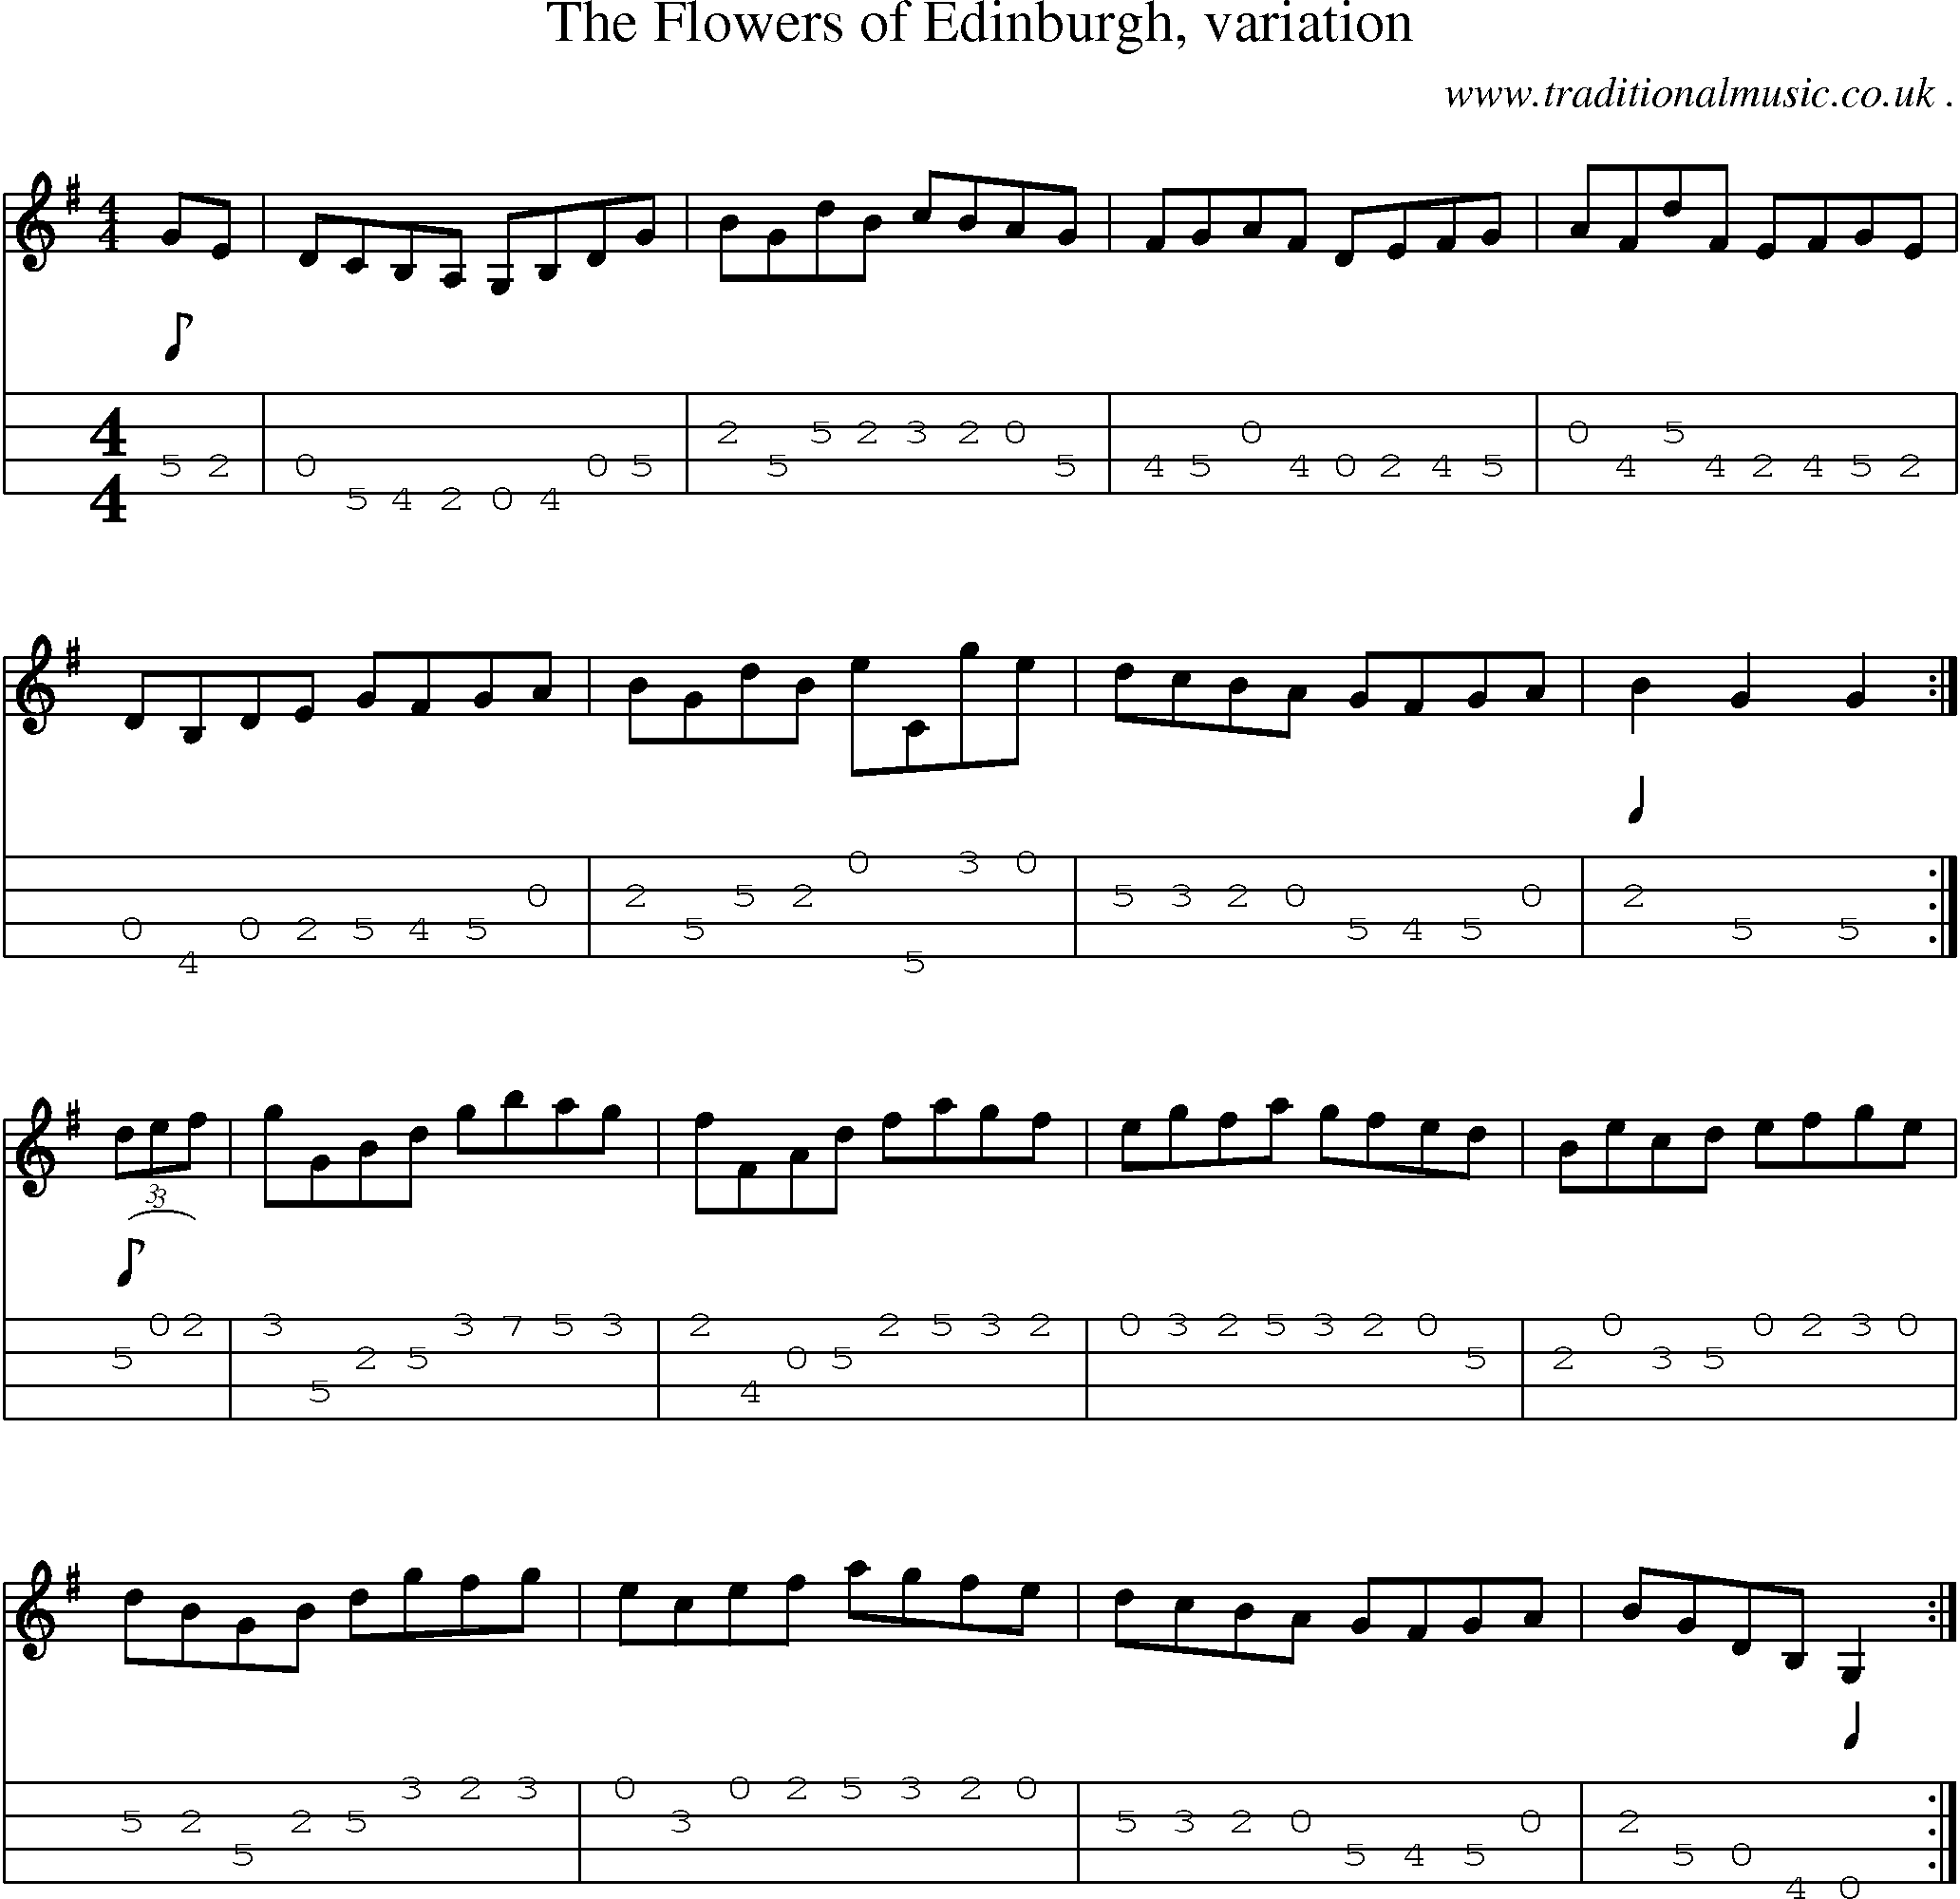 Sheet-music  score, Chords and Mandolin Tabs for The Flowers Of Edinburgh Variation